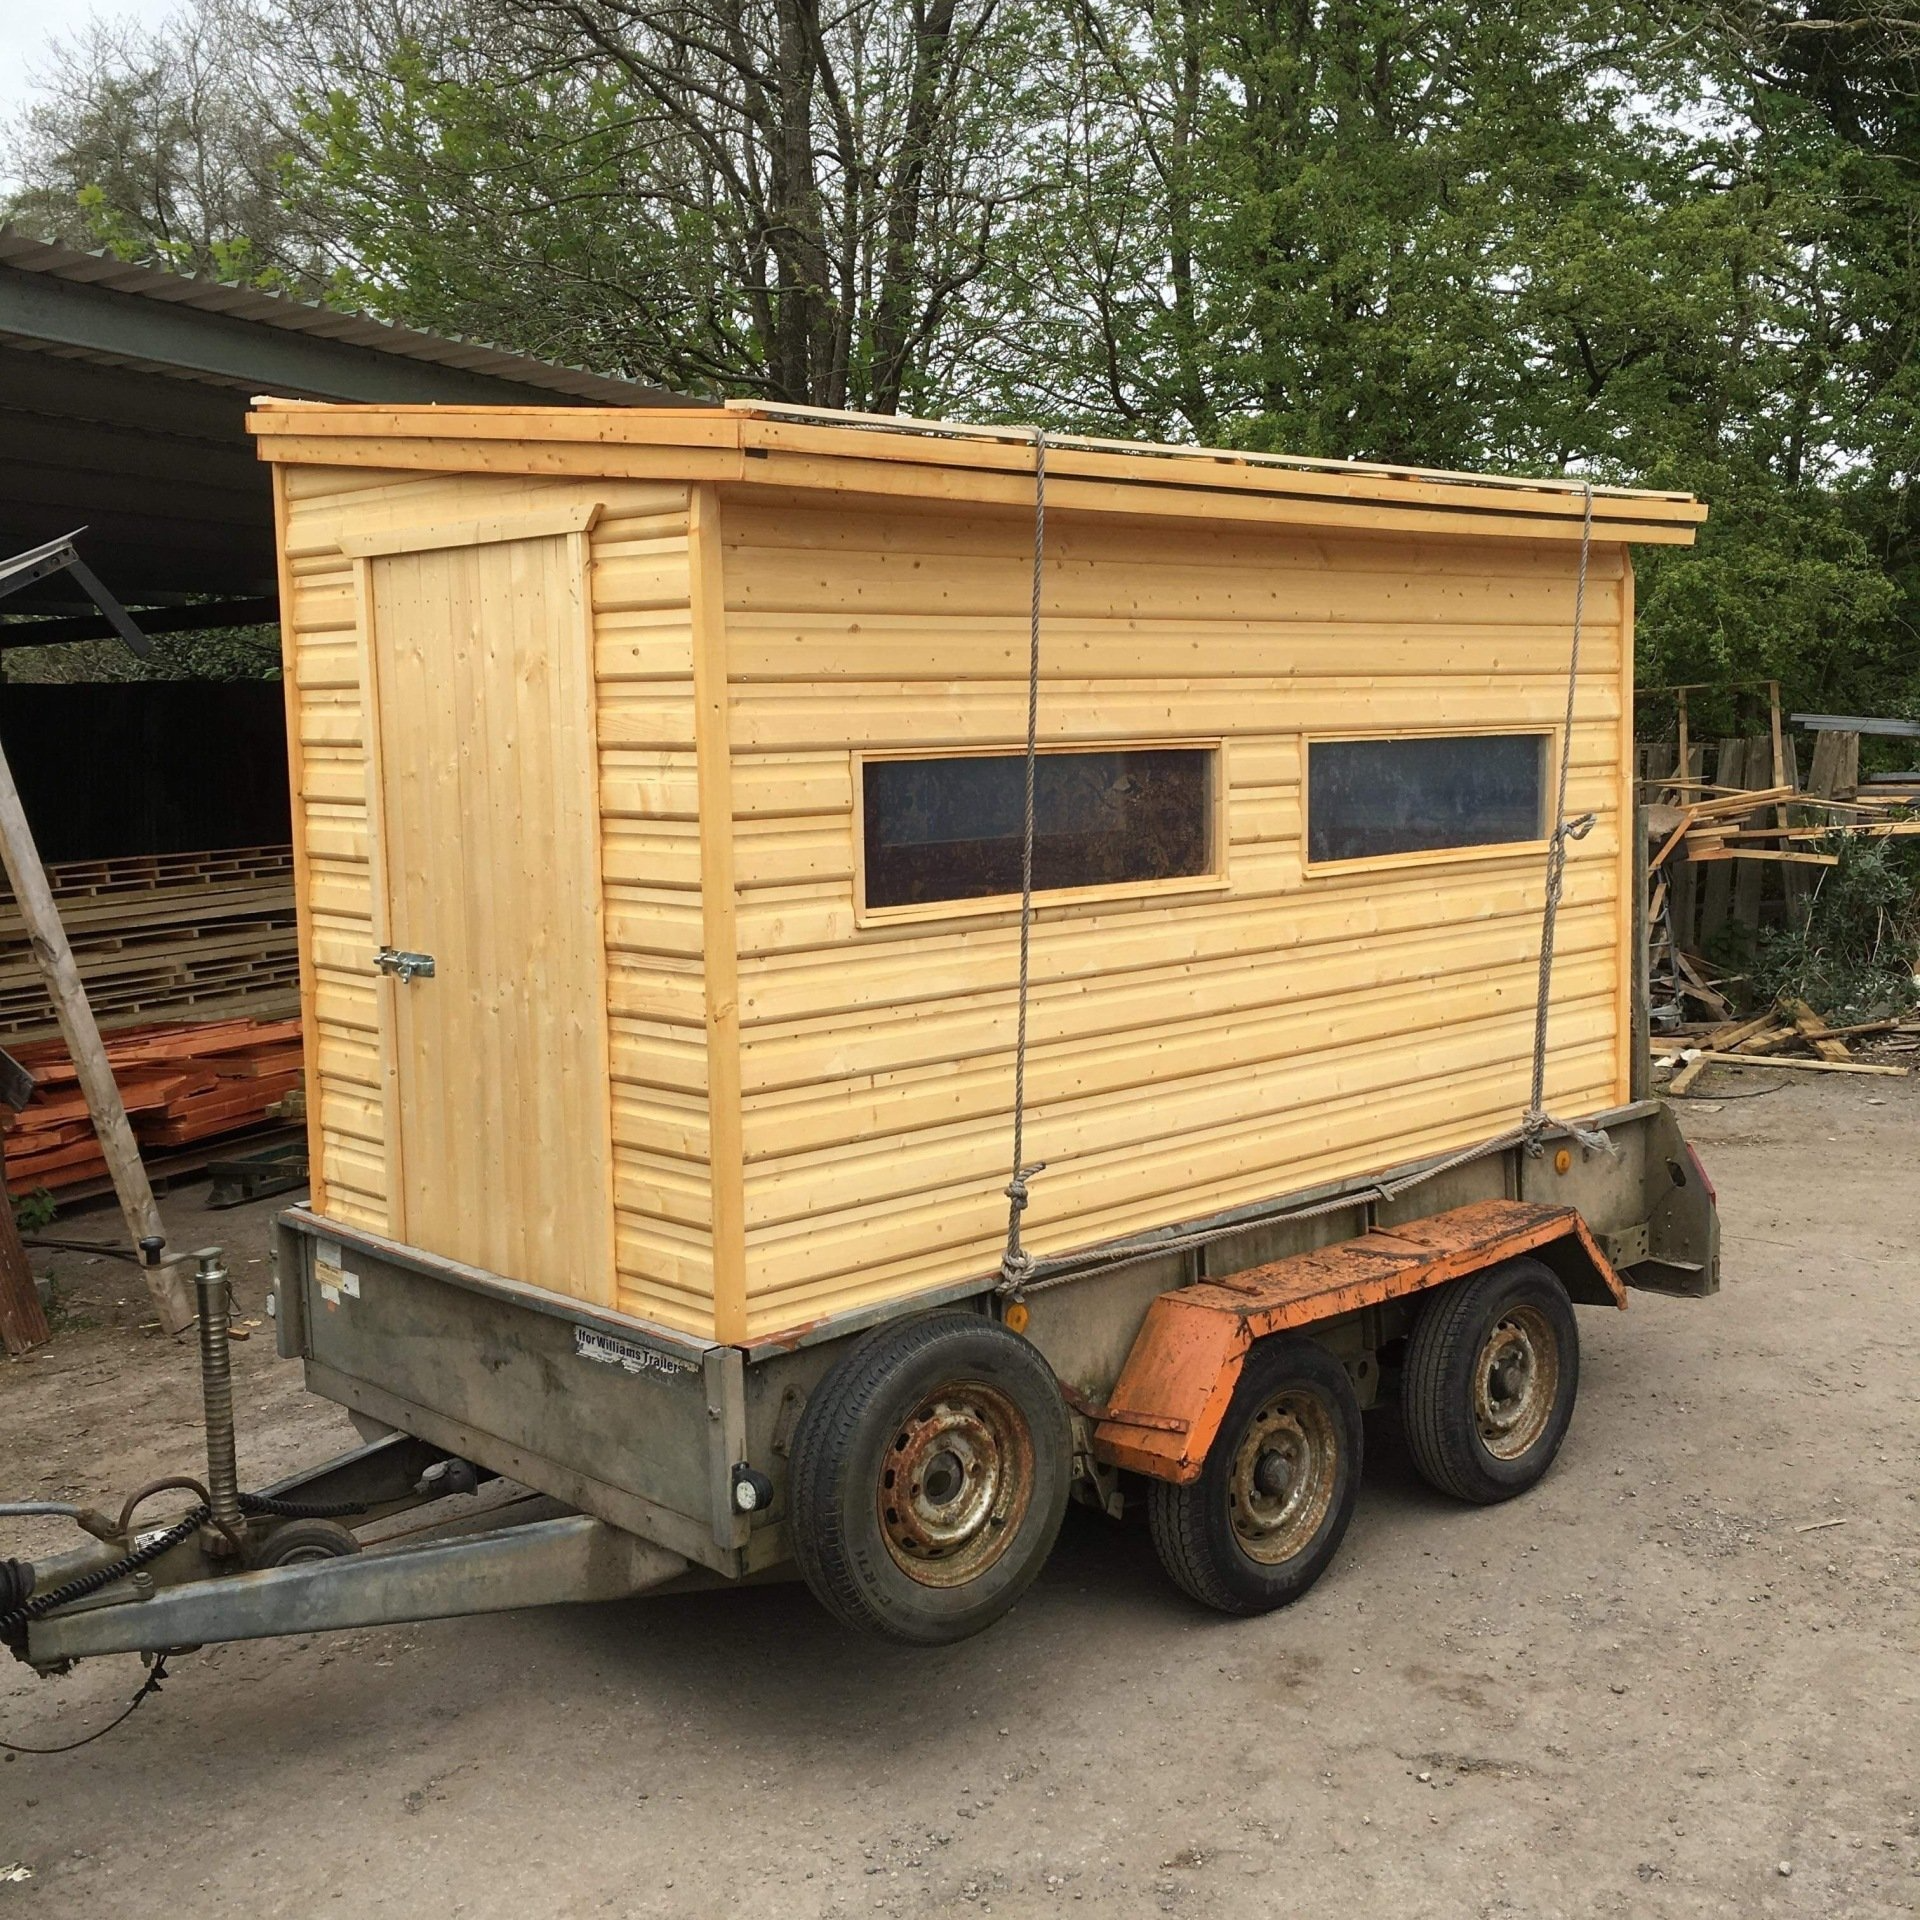 A moveable bird watching shed on a trailer. Trailer was brought to use and we built the building on that. It was painted in holly green to help camouflage while watching birds.